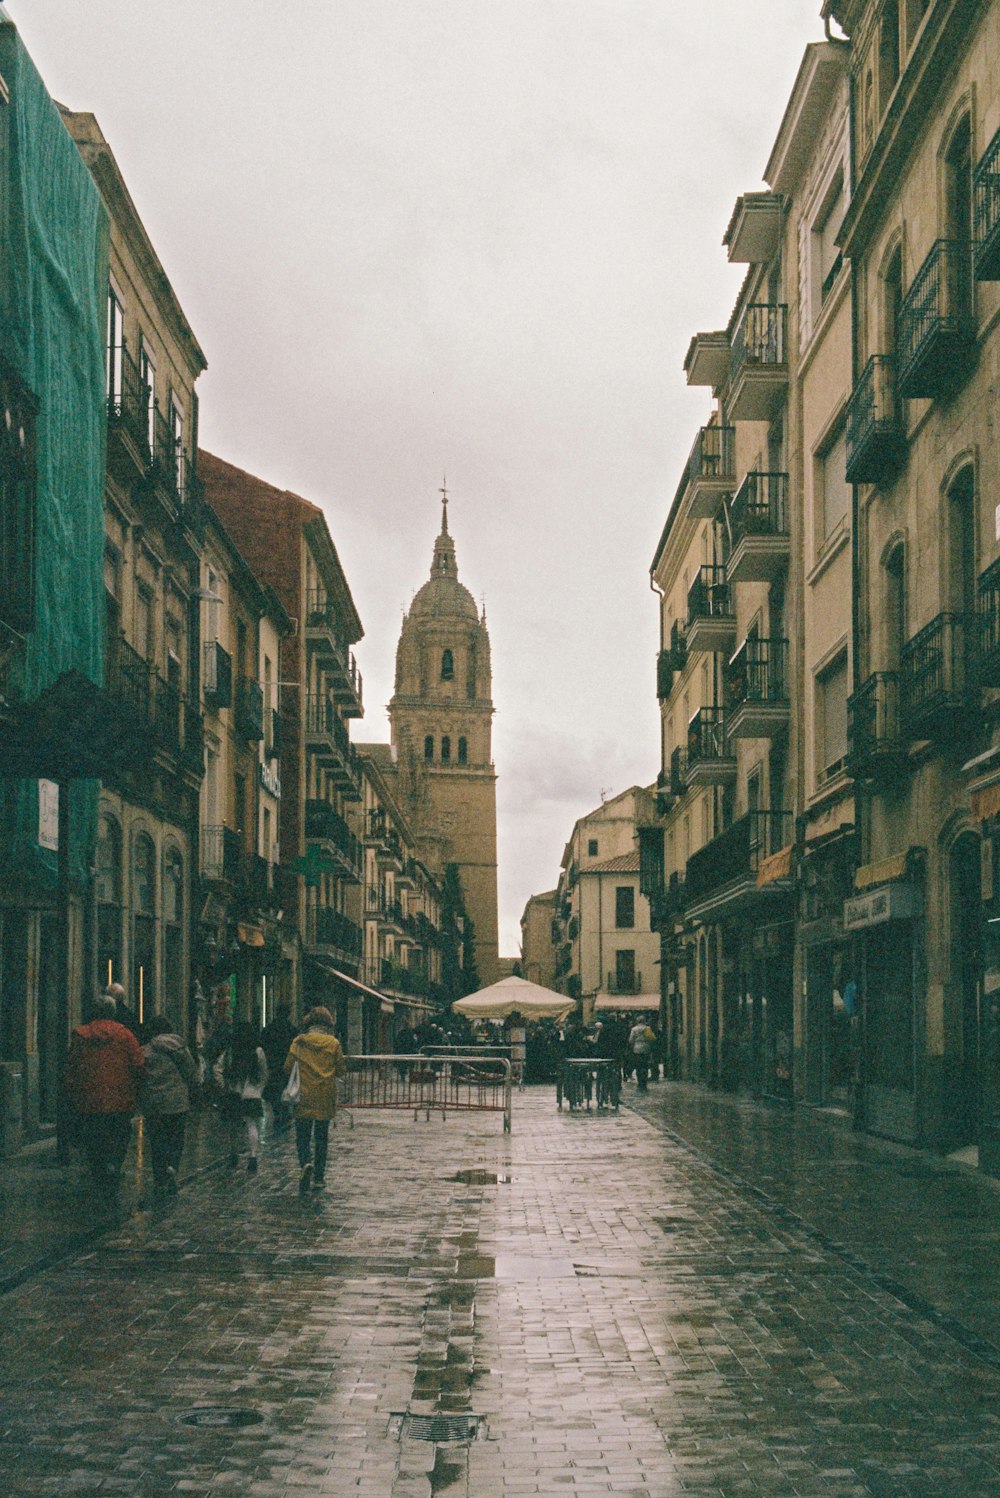 a rainy day in a city with people walking down the street